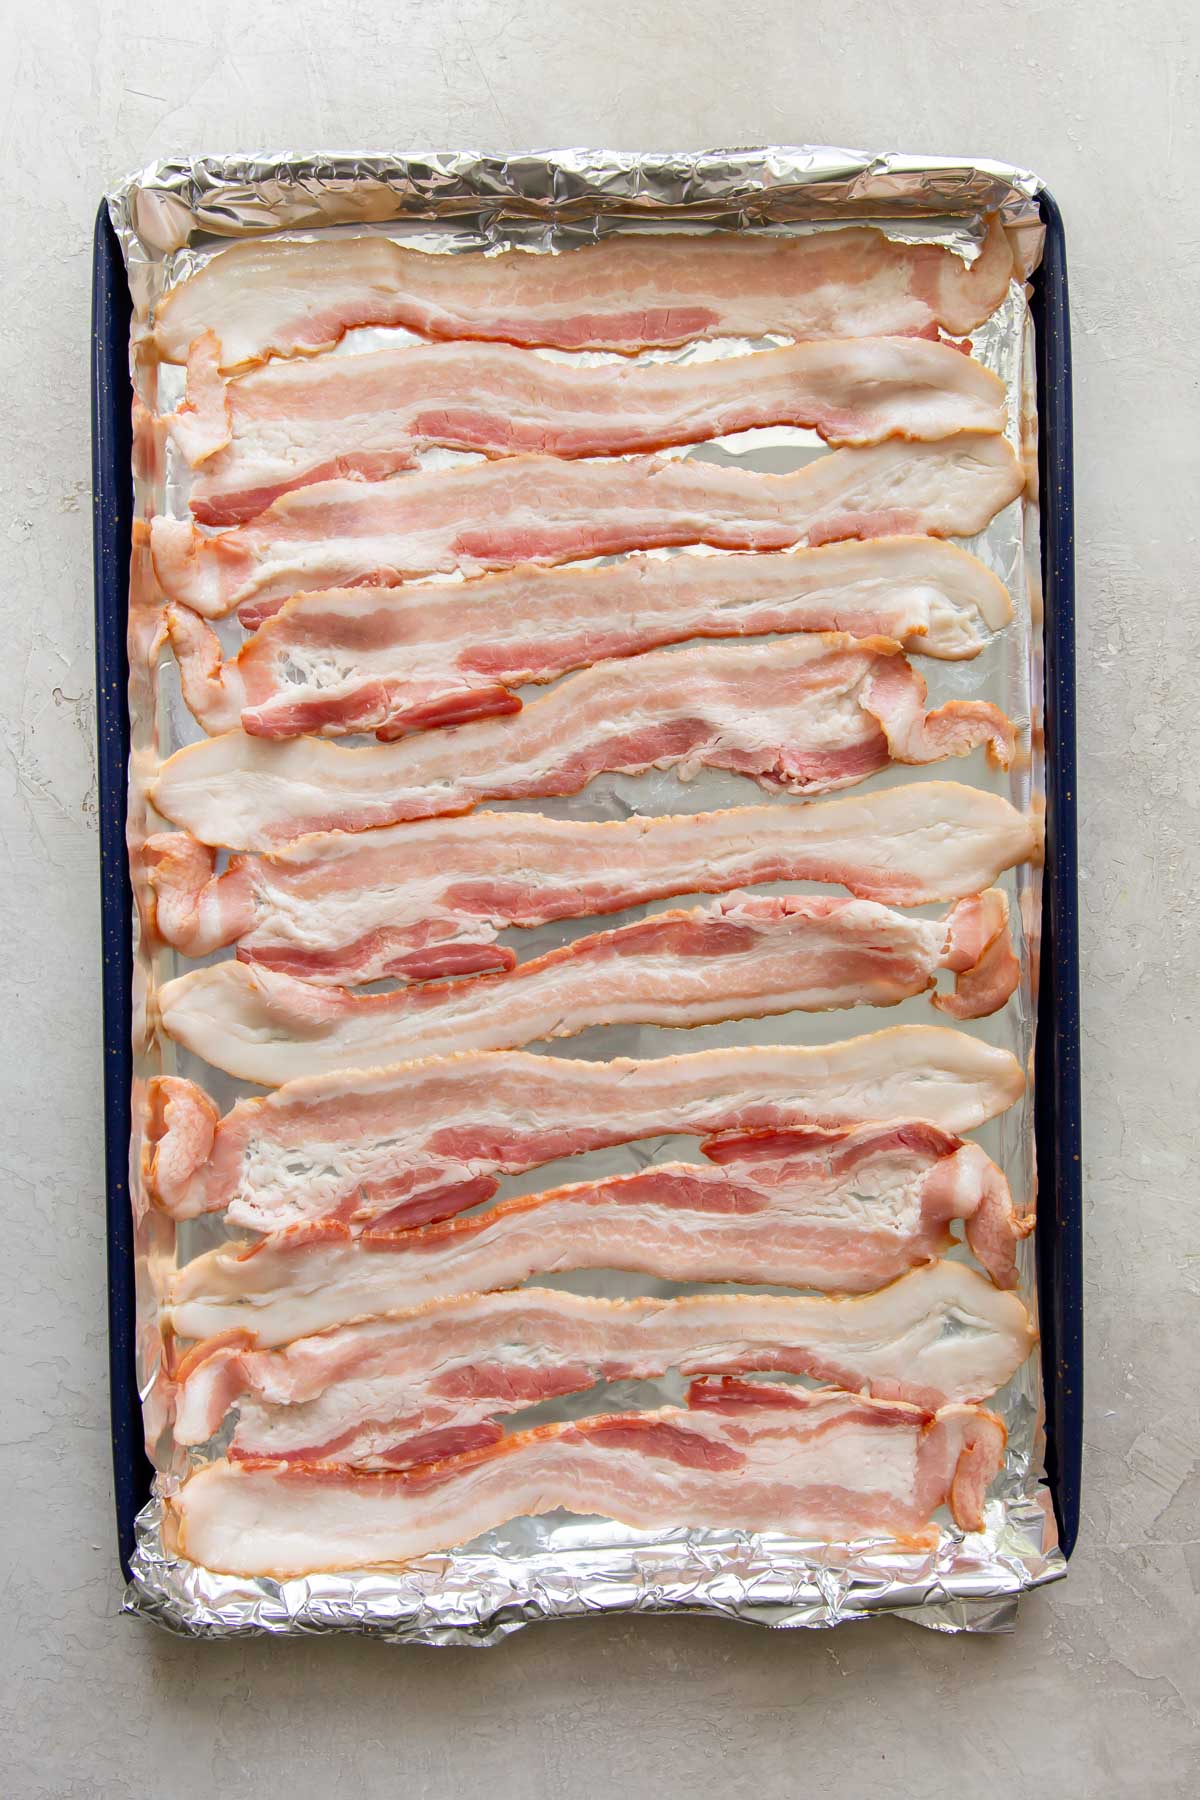 uncooked bacon on a foil-lined rimmed baking sheet